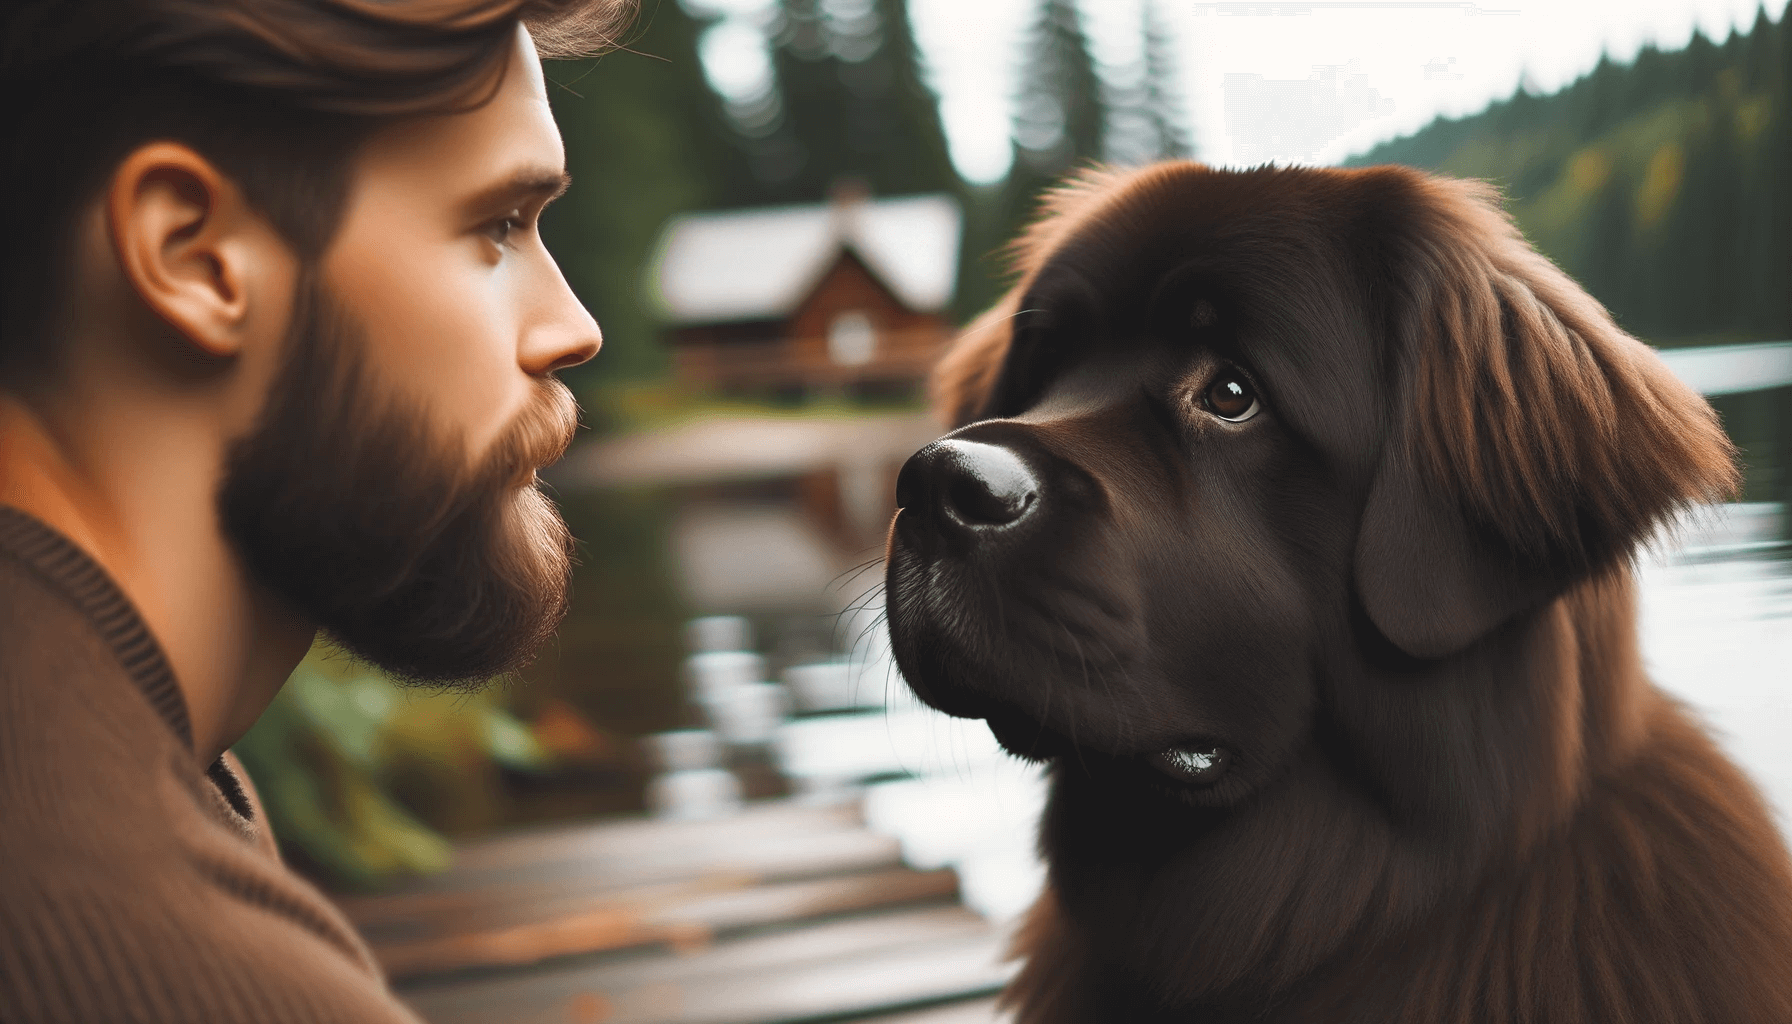 Newfoundland Lab Mix Looking Intently at Its Owner